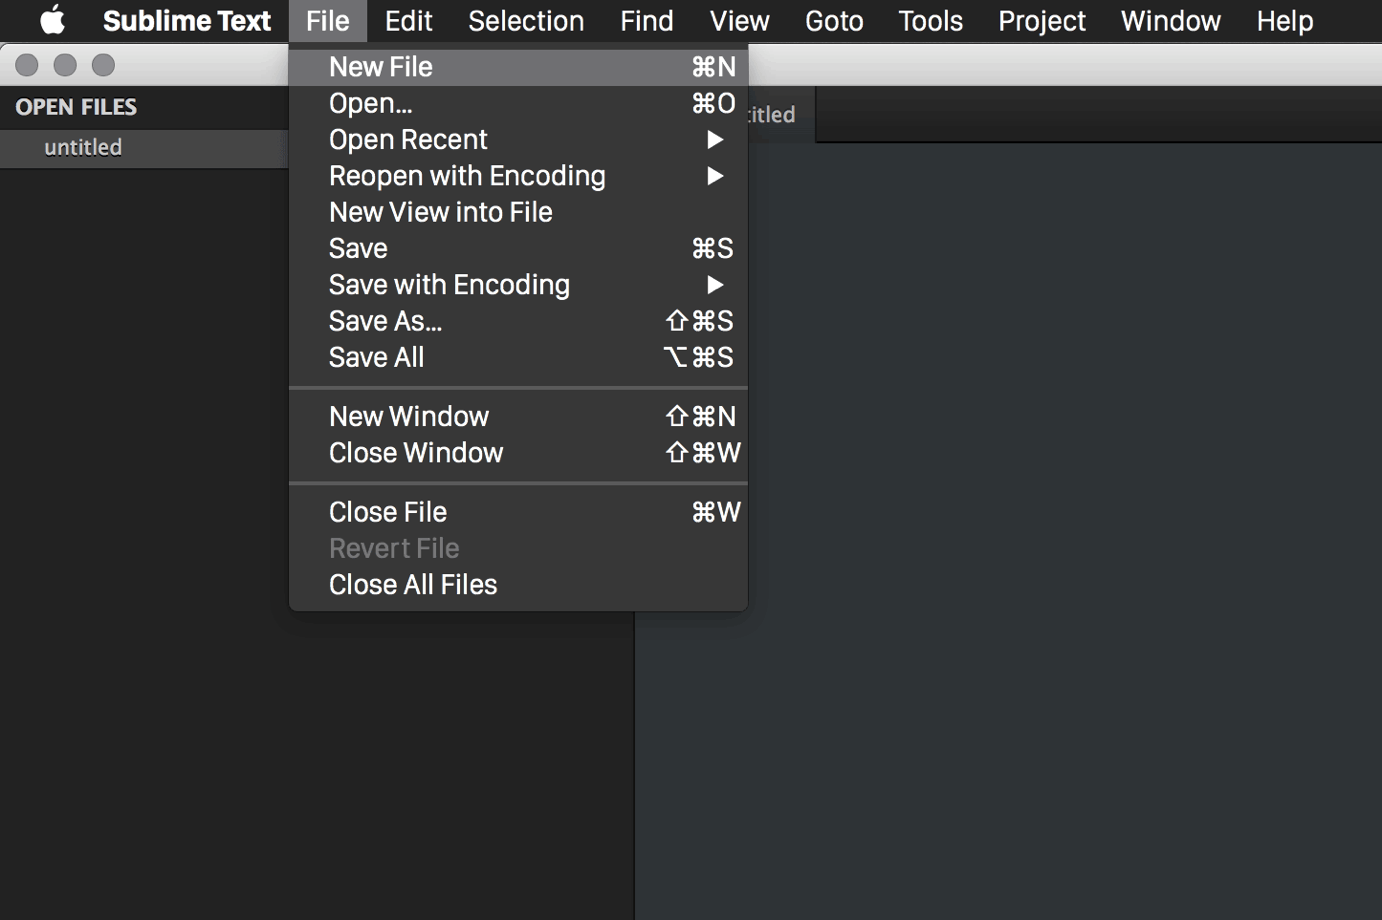 Image of Sublime Texts file menu - New file selected.